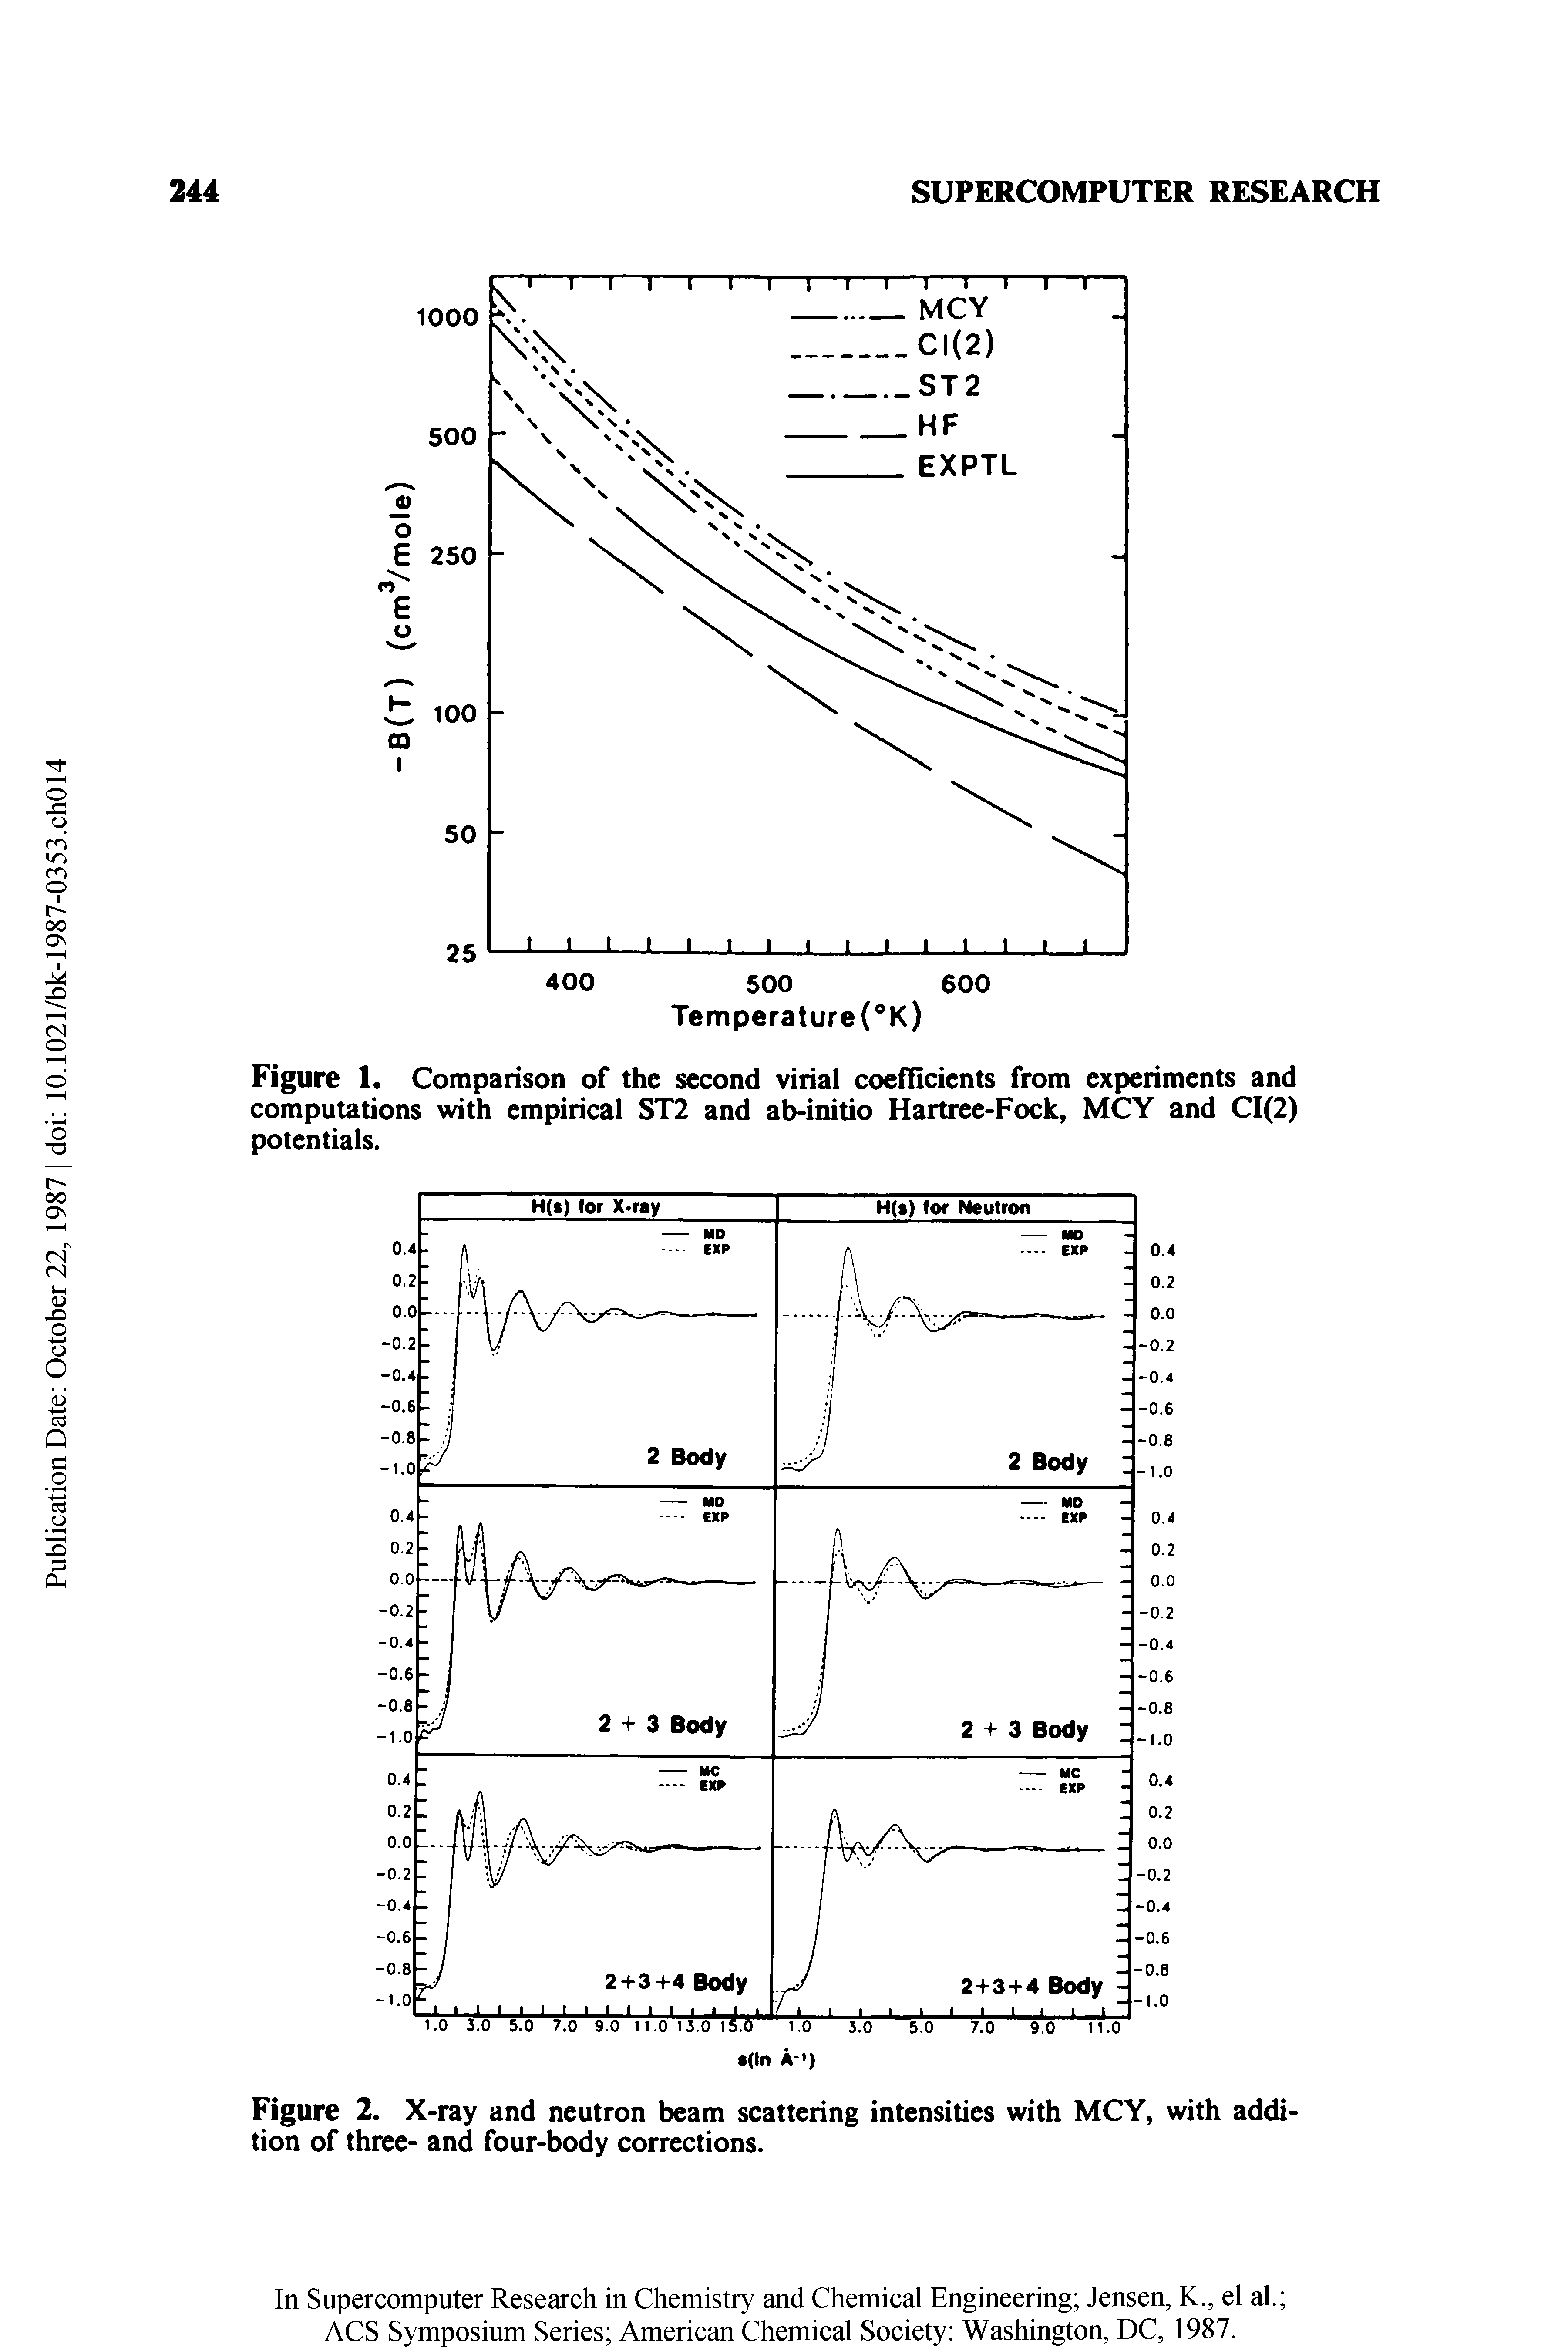 Figure 1. Comparison of the second virial coefUcients from experiments and computations with empirical ST2 and ab-initio Hartree-Fock, MCY and CI(2) potentials.